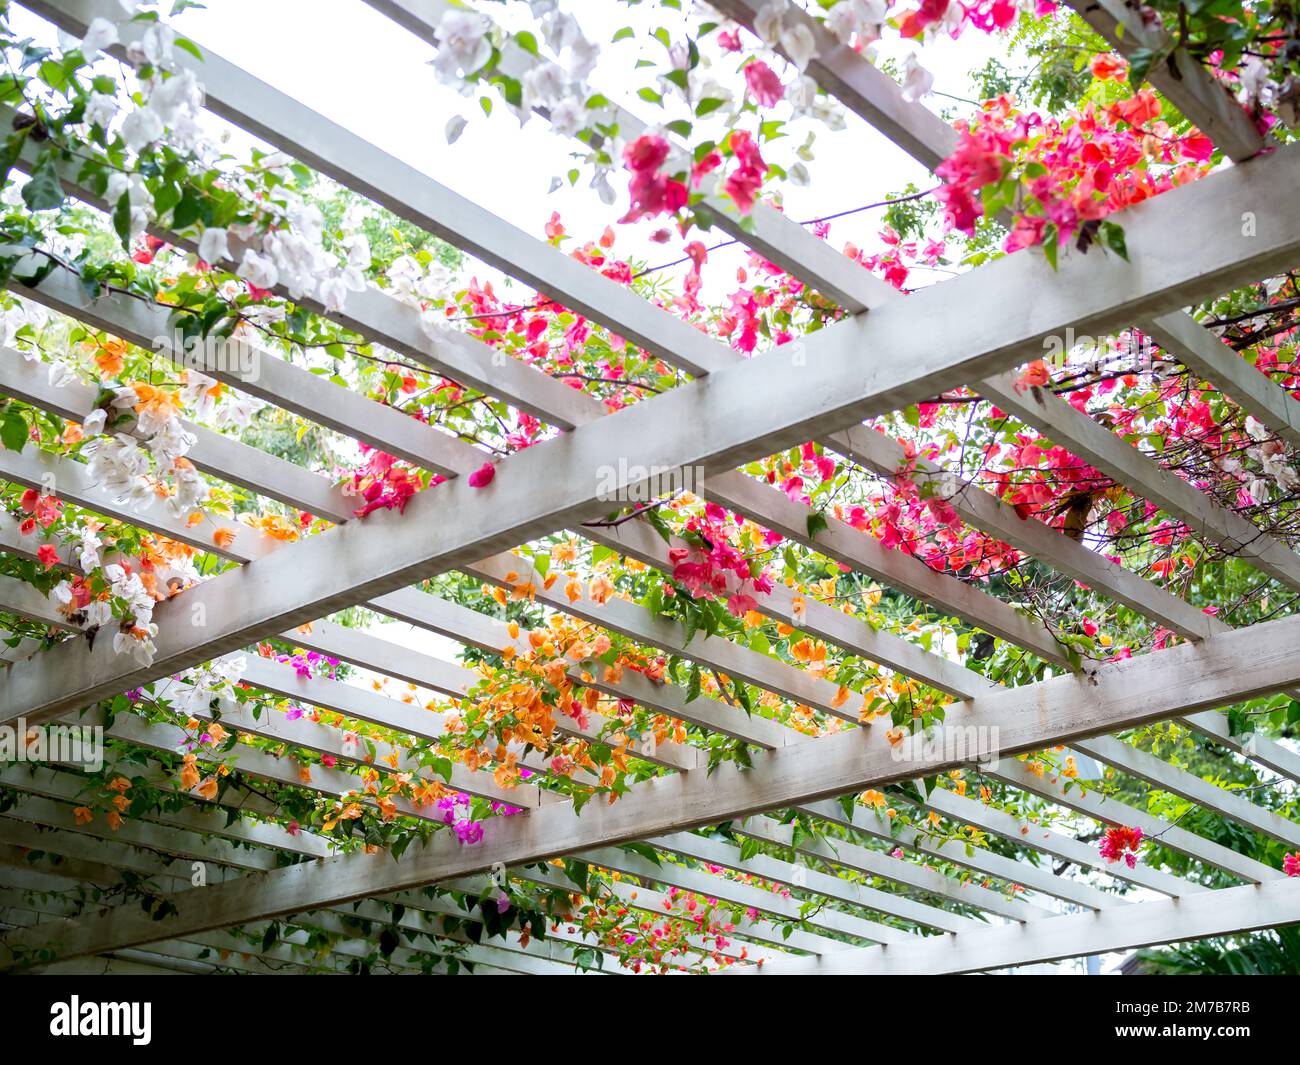 Flowers decoration on wooden pergola roof. Landscape home design background. Ivy plant on the white wooden slatted roof. Stock Photo